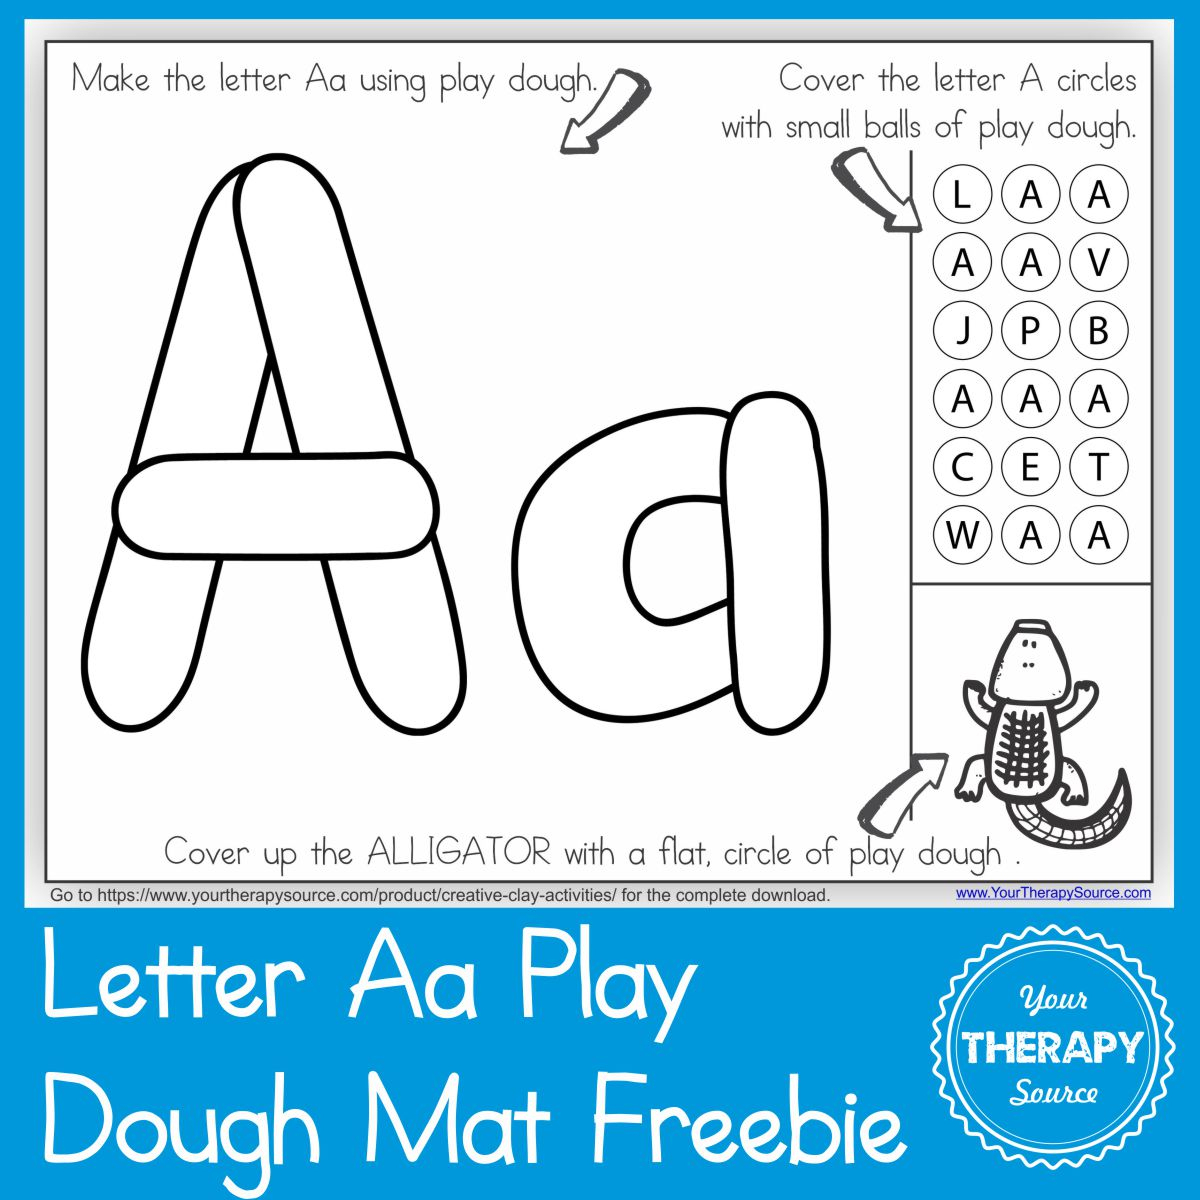 Alphabet Playdough Mat - Letter Aa - Your Therapy Source - Alphabet Playdough Mats Free Printable